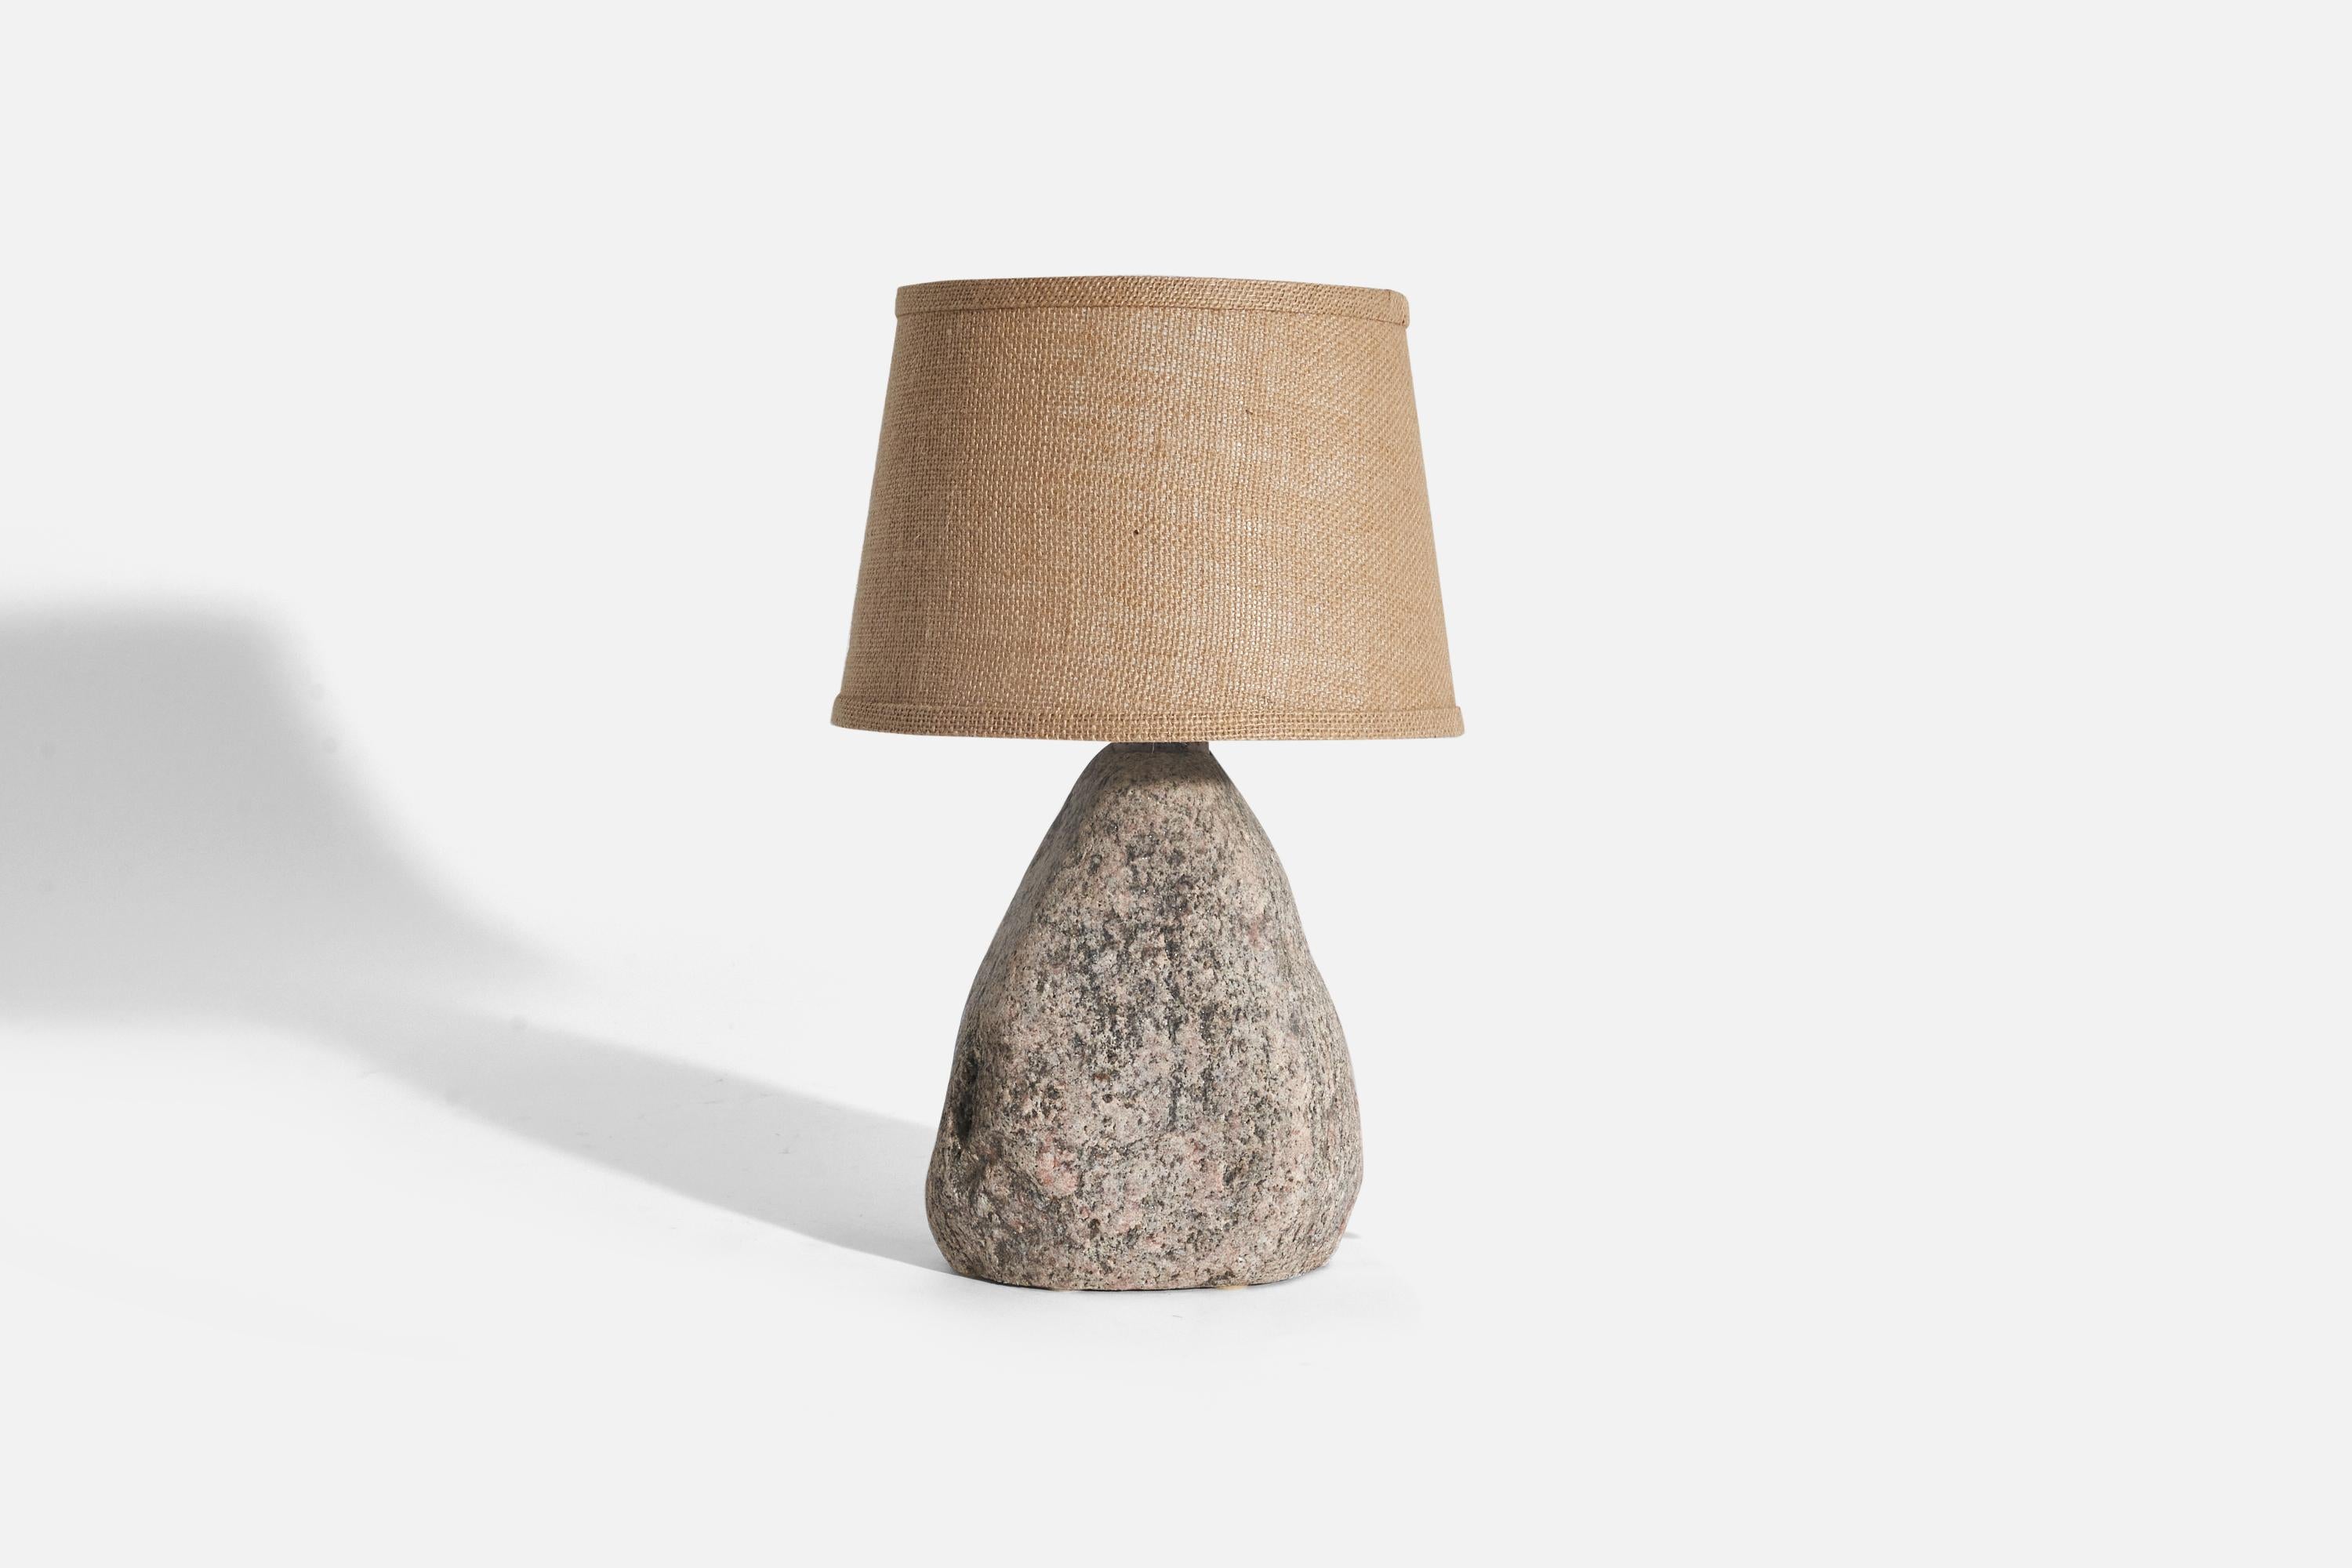 A stone table lamp designed and produced by Svane Stone AB, Sweden, c. 1970s.

Sold with fabric lampshade(s)
Dimensions of lamp (inches) : 11.87 x 7.06 x 4.43 (Height x Width x Depth)
Dimensions of shade (inches) : 8.25 x 10.37 x 7.12 (Top